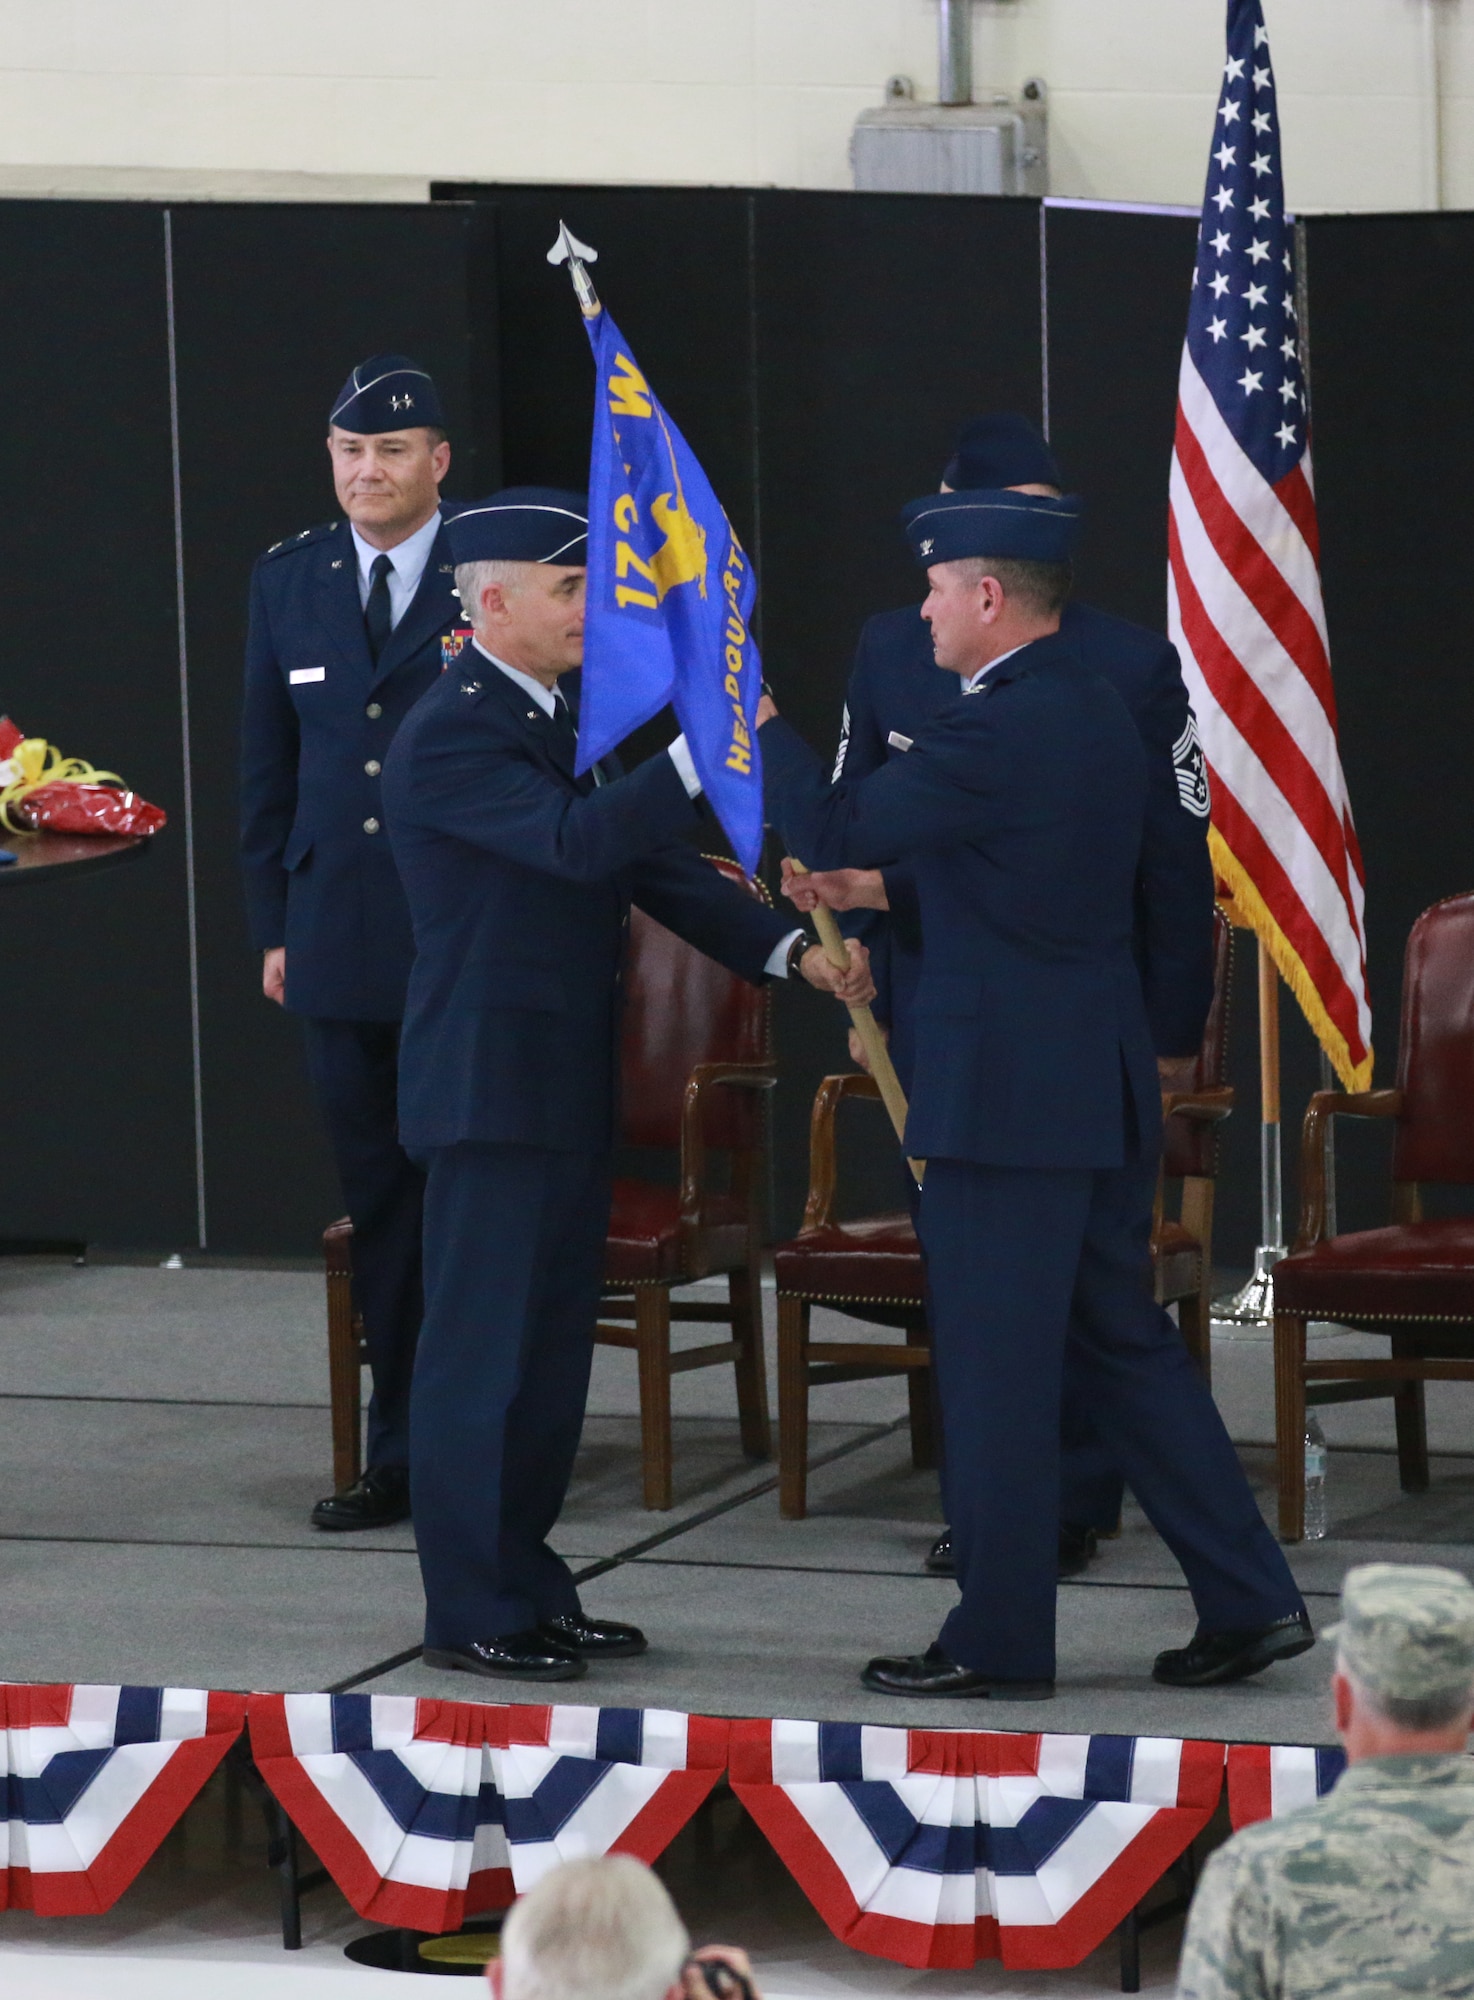 Brig. General Jeff Silver, Oregon Air National Guard Commander, passes the guideon to Col. Jeffrey Smith as he accepts command of the 173rd Fighter Wing during a change of command ceremony April 3, 2016 at Kingsley Field in Klamath Falls, Ore. Brig. Gen. Kirk Pierce relinquished command following his promotion to flag rank earlier in the afternoon. (U.S. Air National Guard photo by Tech. Sgt. Jefferson Thompson/released)